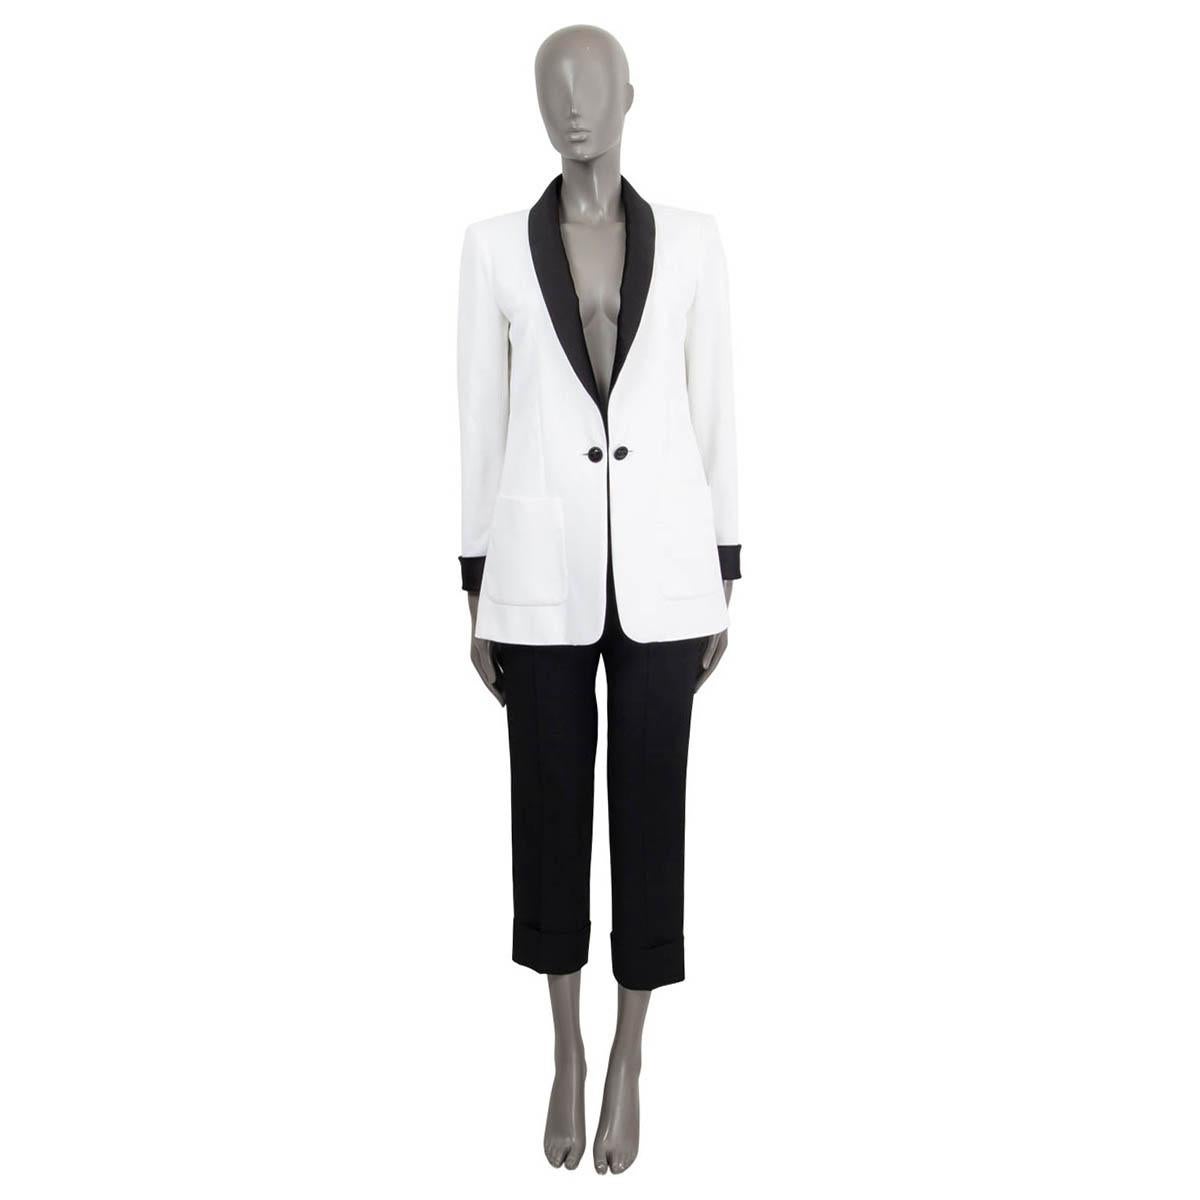 100% authentic Chanel 2018 crepe tuxedo jacket in white viscose (100%) with a satin collar and cuffs in black polyester (70%) and silk (30%). Features two patch pockets on the front. Opens with one 'CC' button on the front. Lined in off-white silk